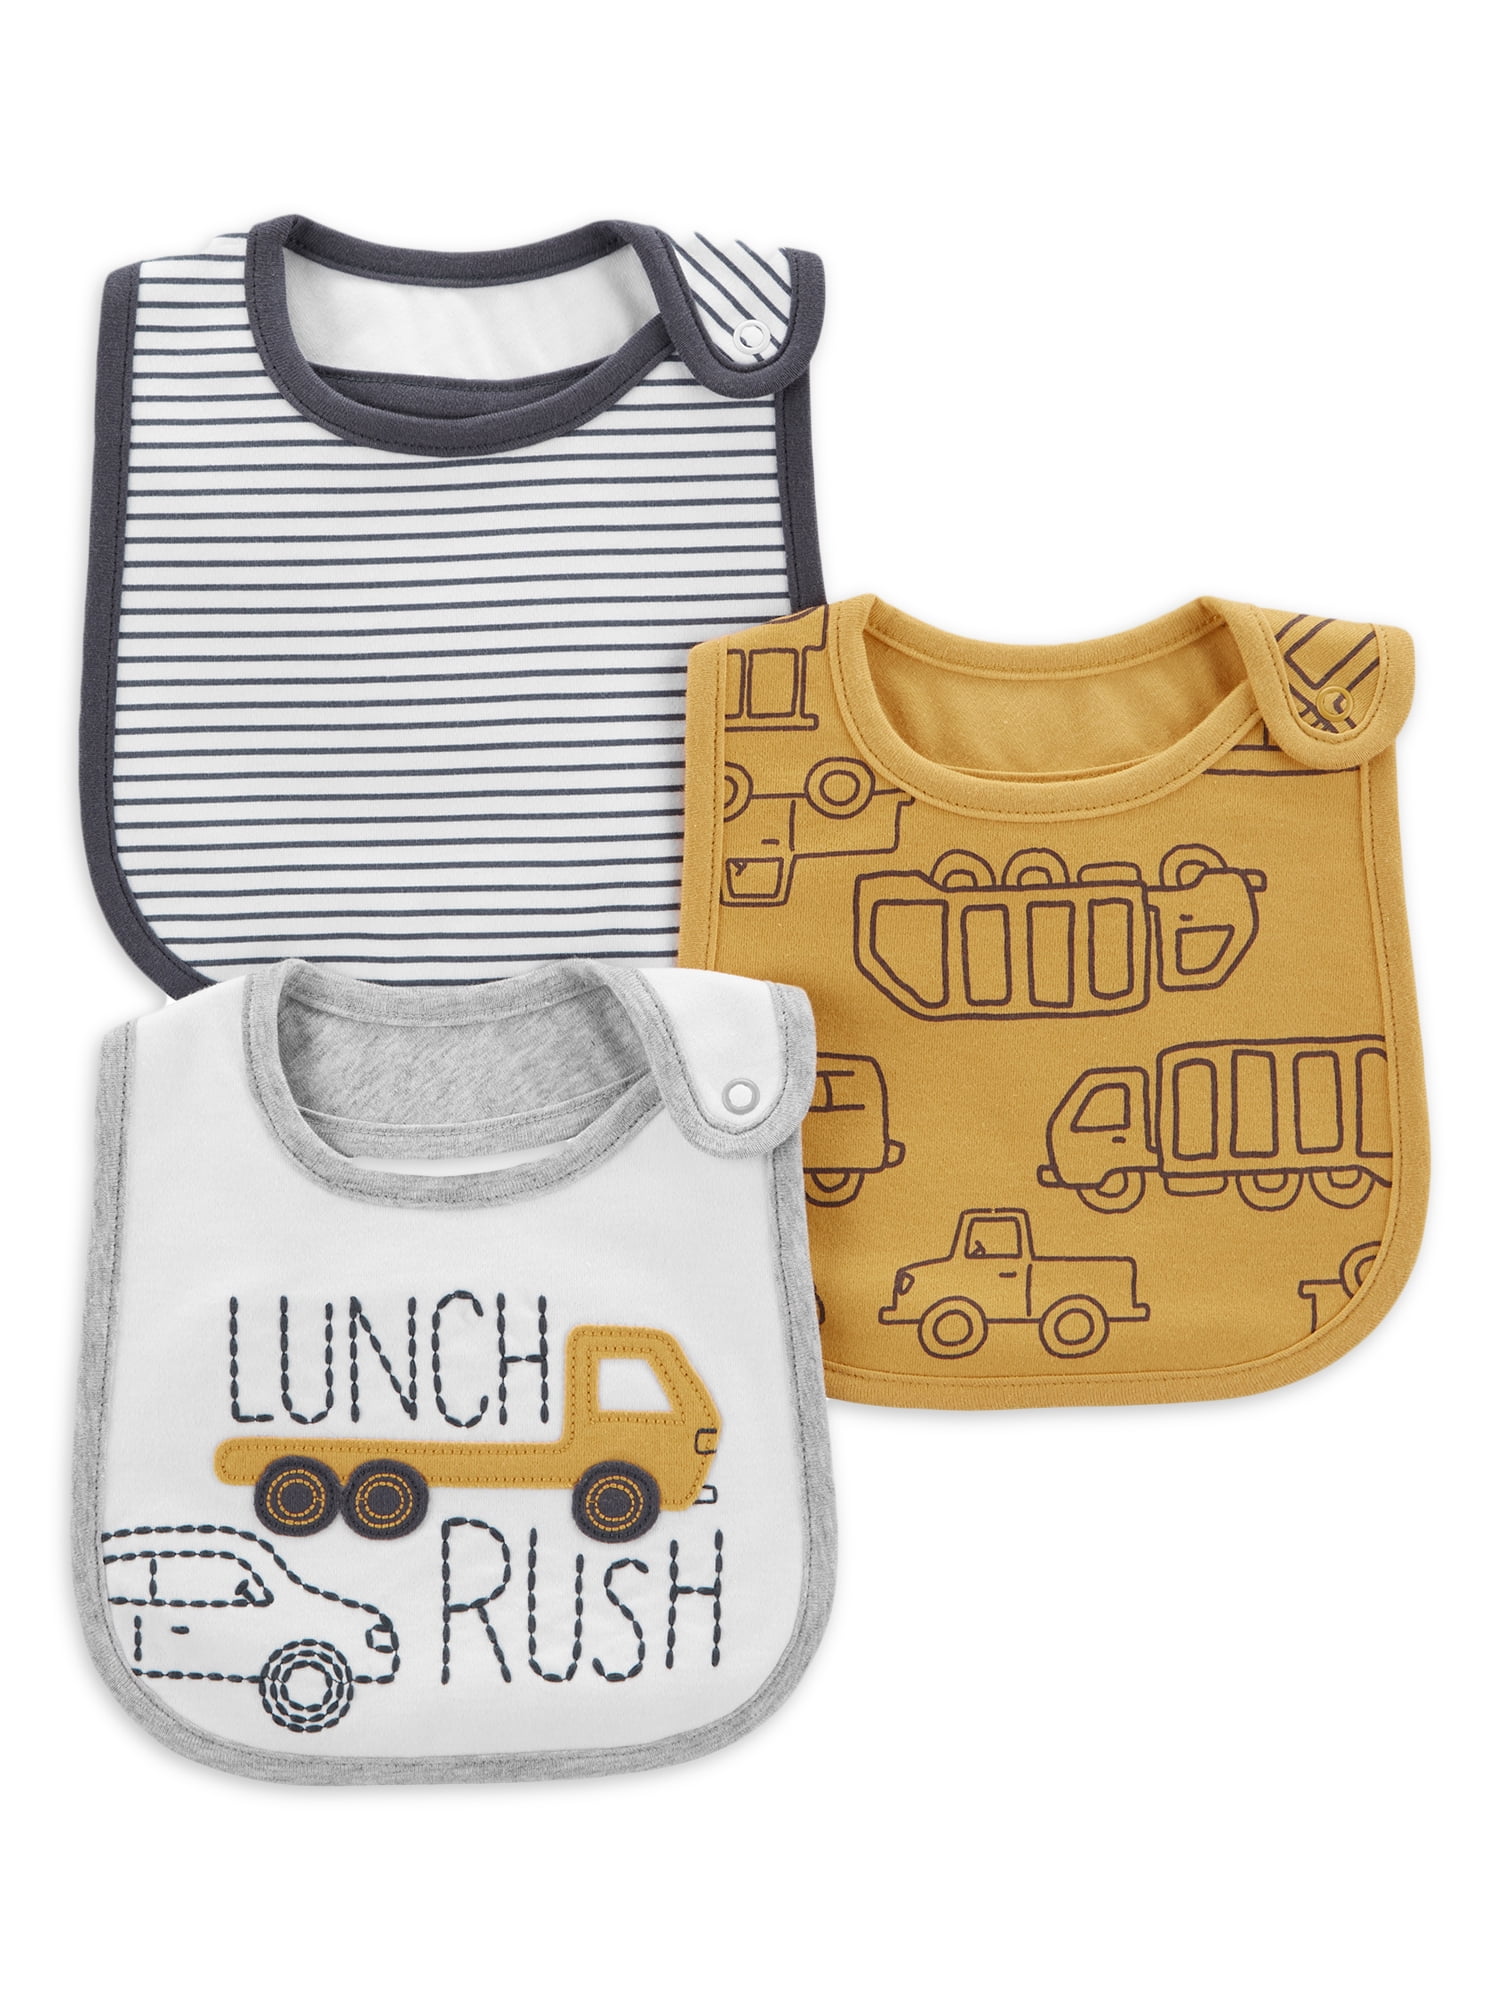 Carter's Child of Mine Baby Boy Bibs, 3-Pack, Sizes One Size